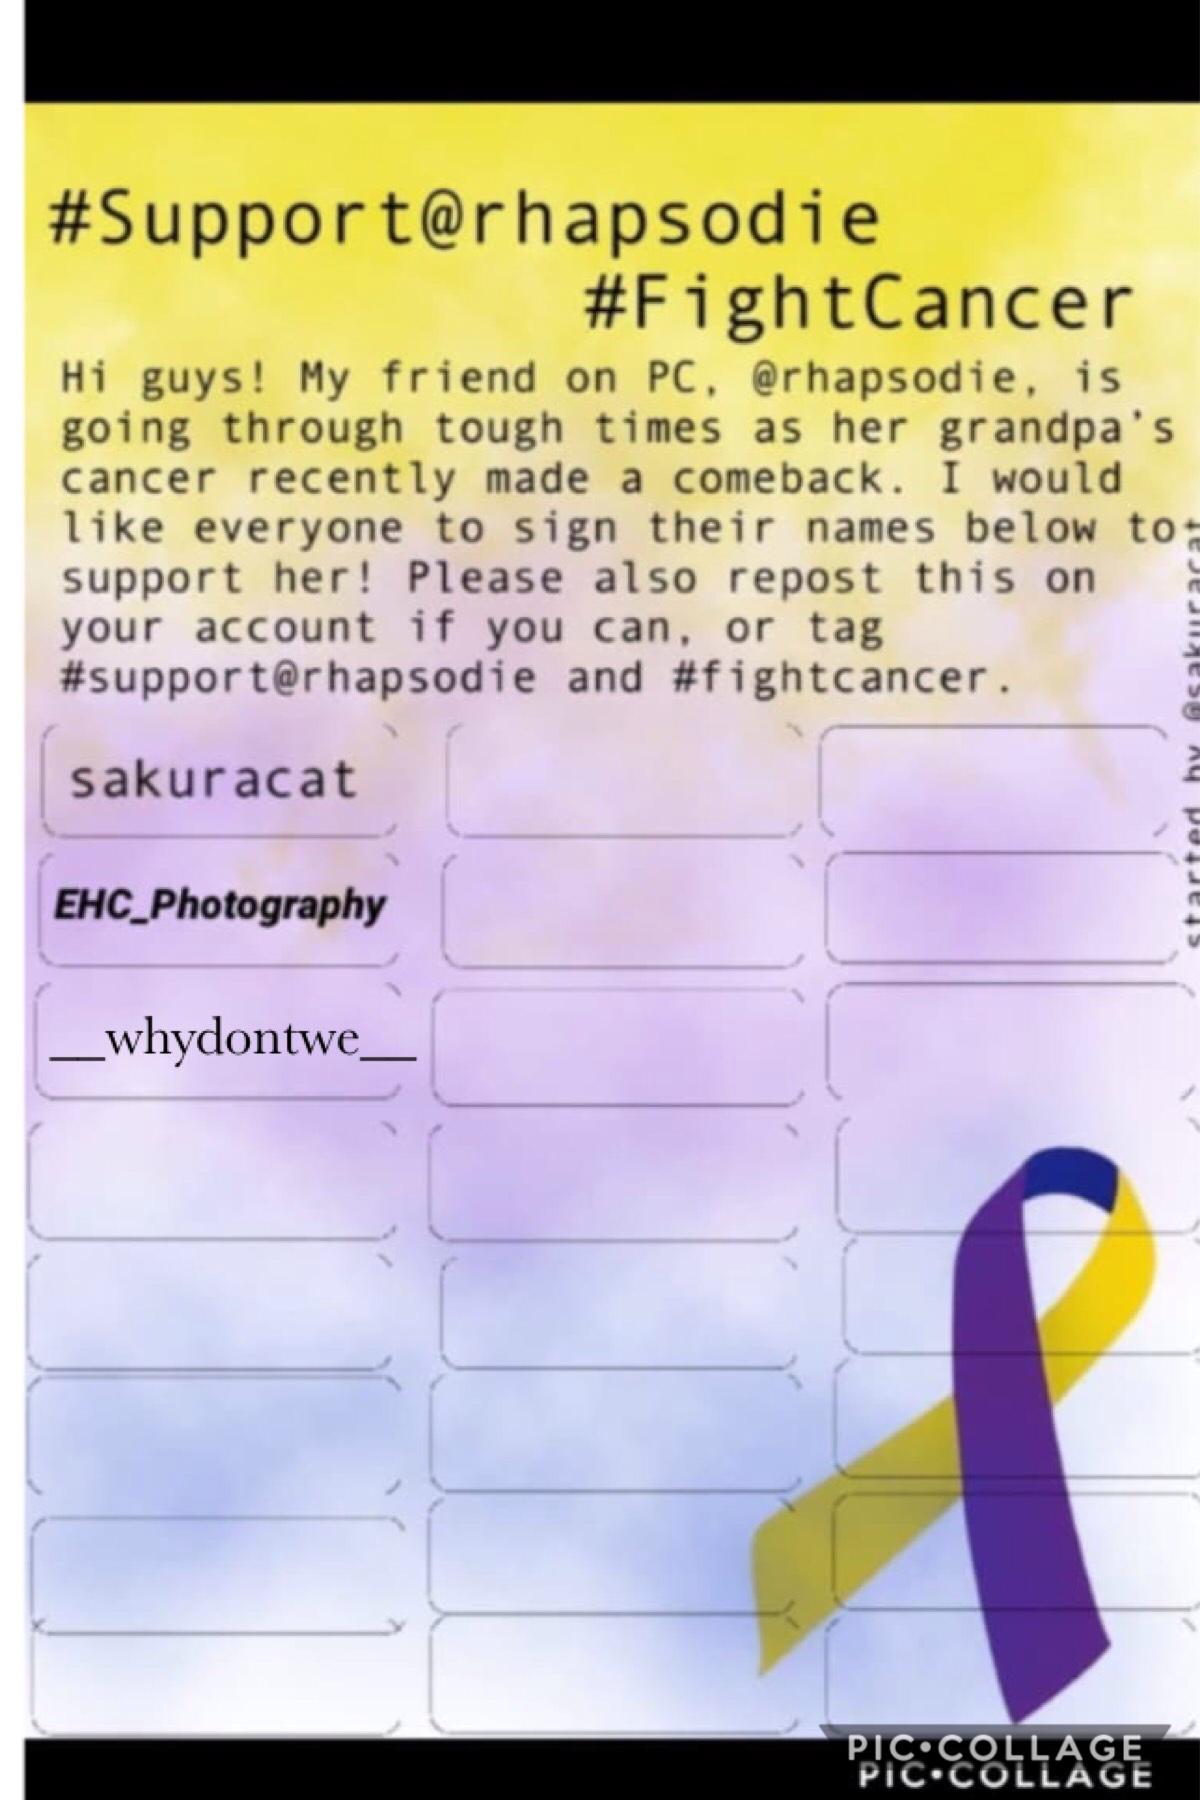 #fightcancer 



Guys, this hits home for me because my best friend had cancer for like, the longest time. She told me that the hospital felt like her home! That's just sad...